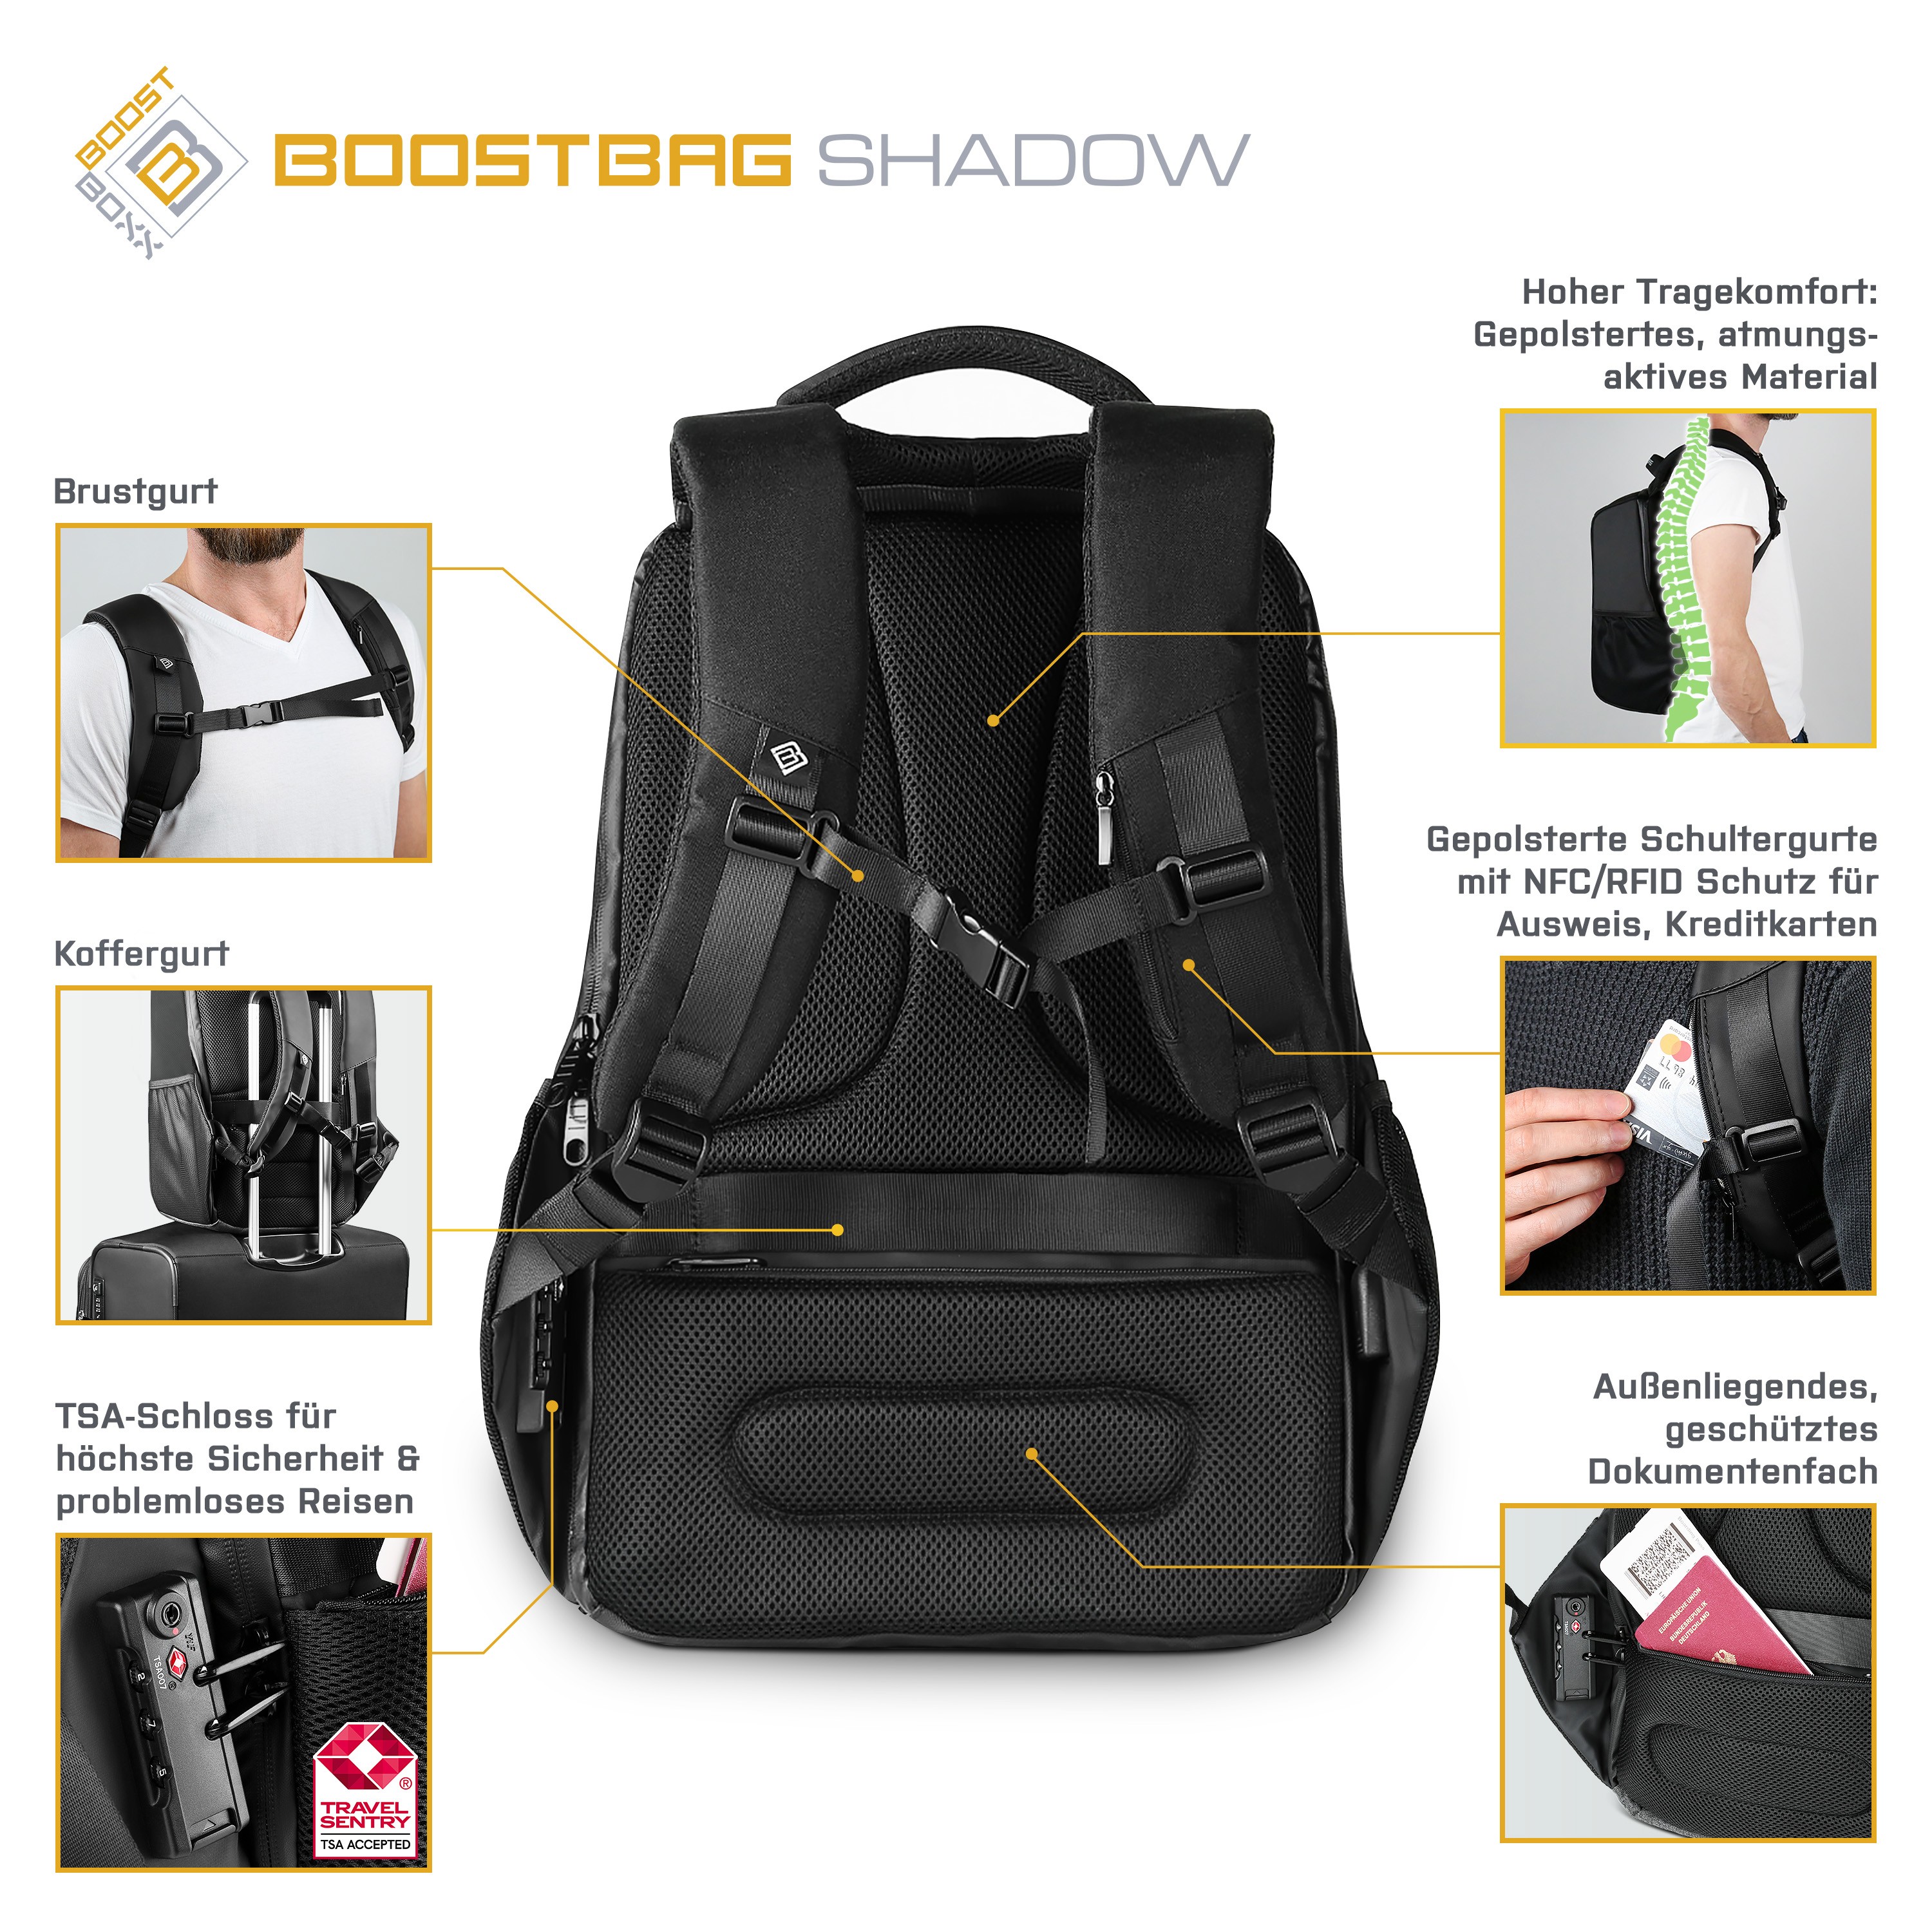 to | Notebook CSL Computer Shadow up Backpack BoostBoxx - BoostBag